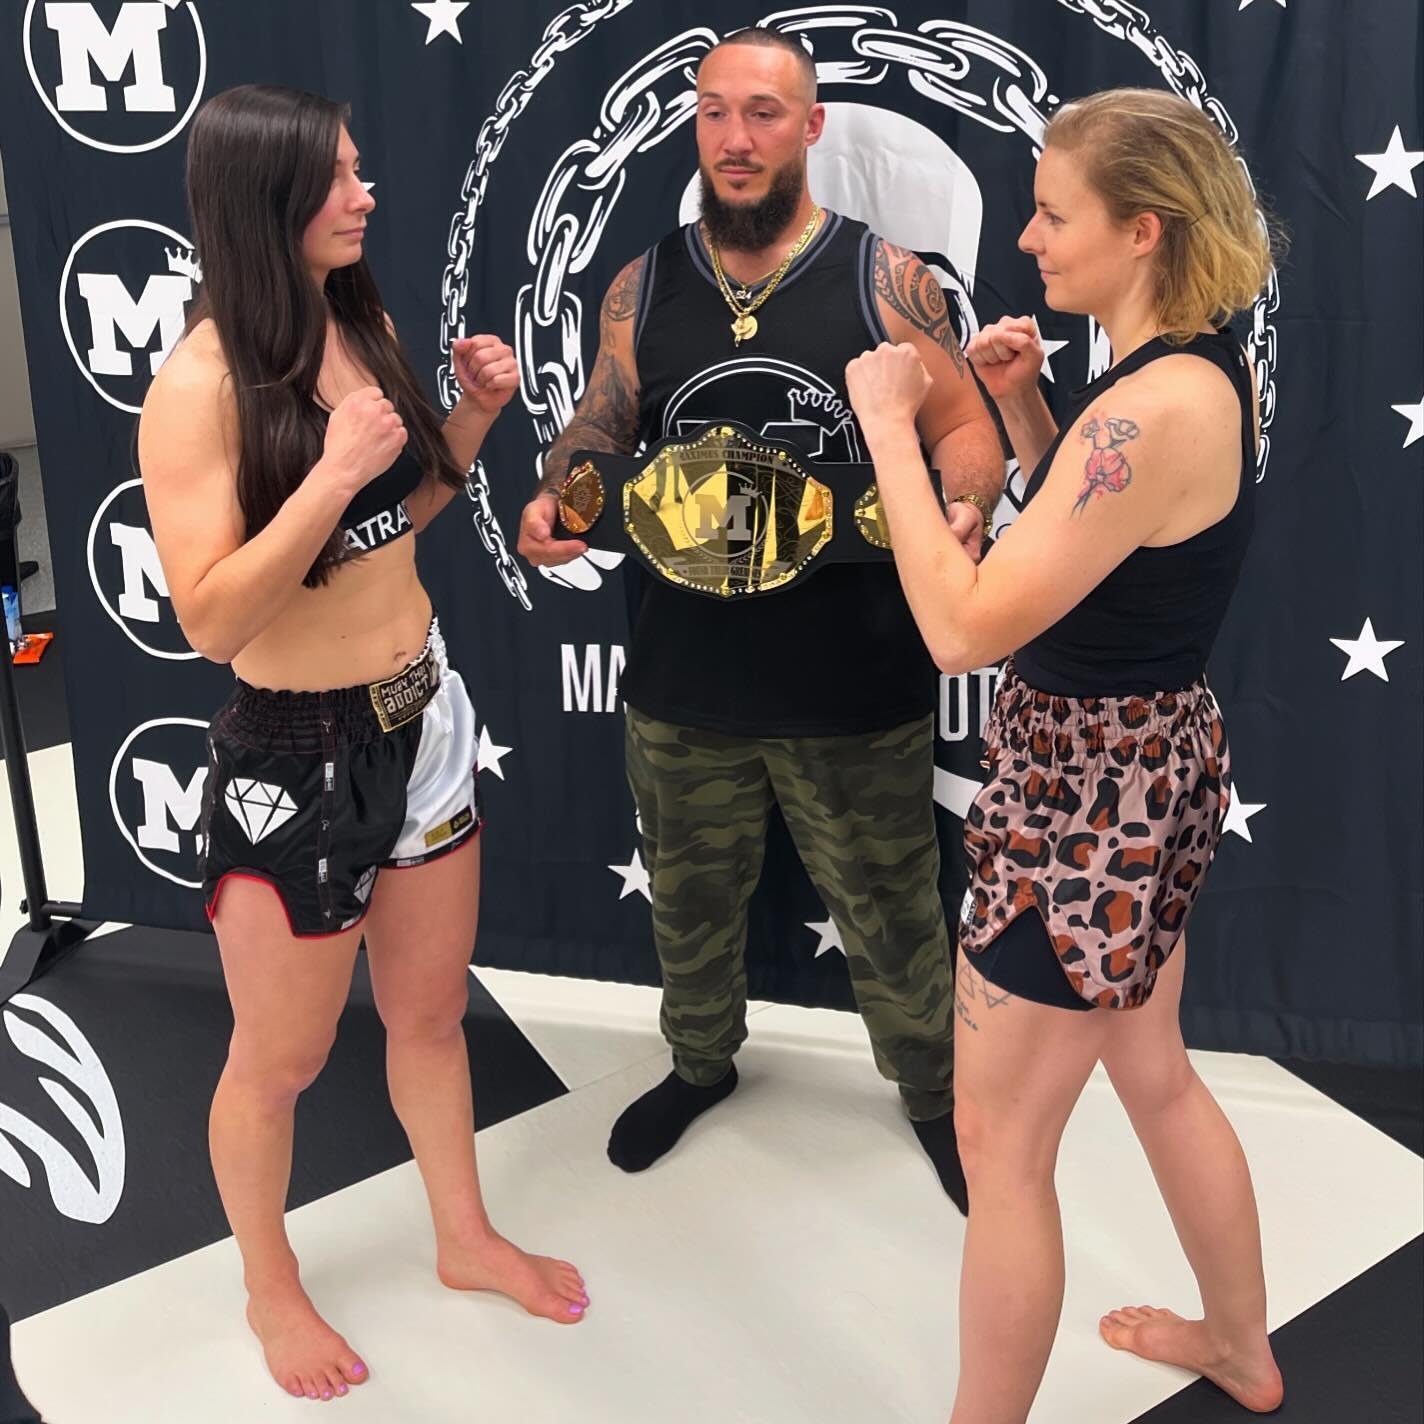 @ingridm______ is on weight and ready to throw down tomorrow night! Coming for the @maximus_promotions light welterweight championship! 
.
.
.
.
#muaythai #fight #fighter #fighter #titlefight #championship #thaiboxing #boxing #martialarts #chicago #m